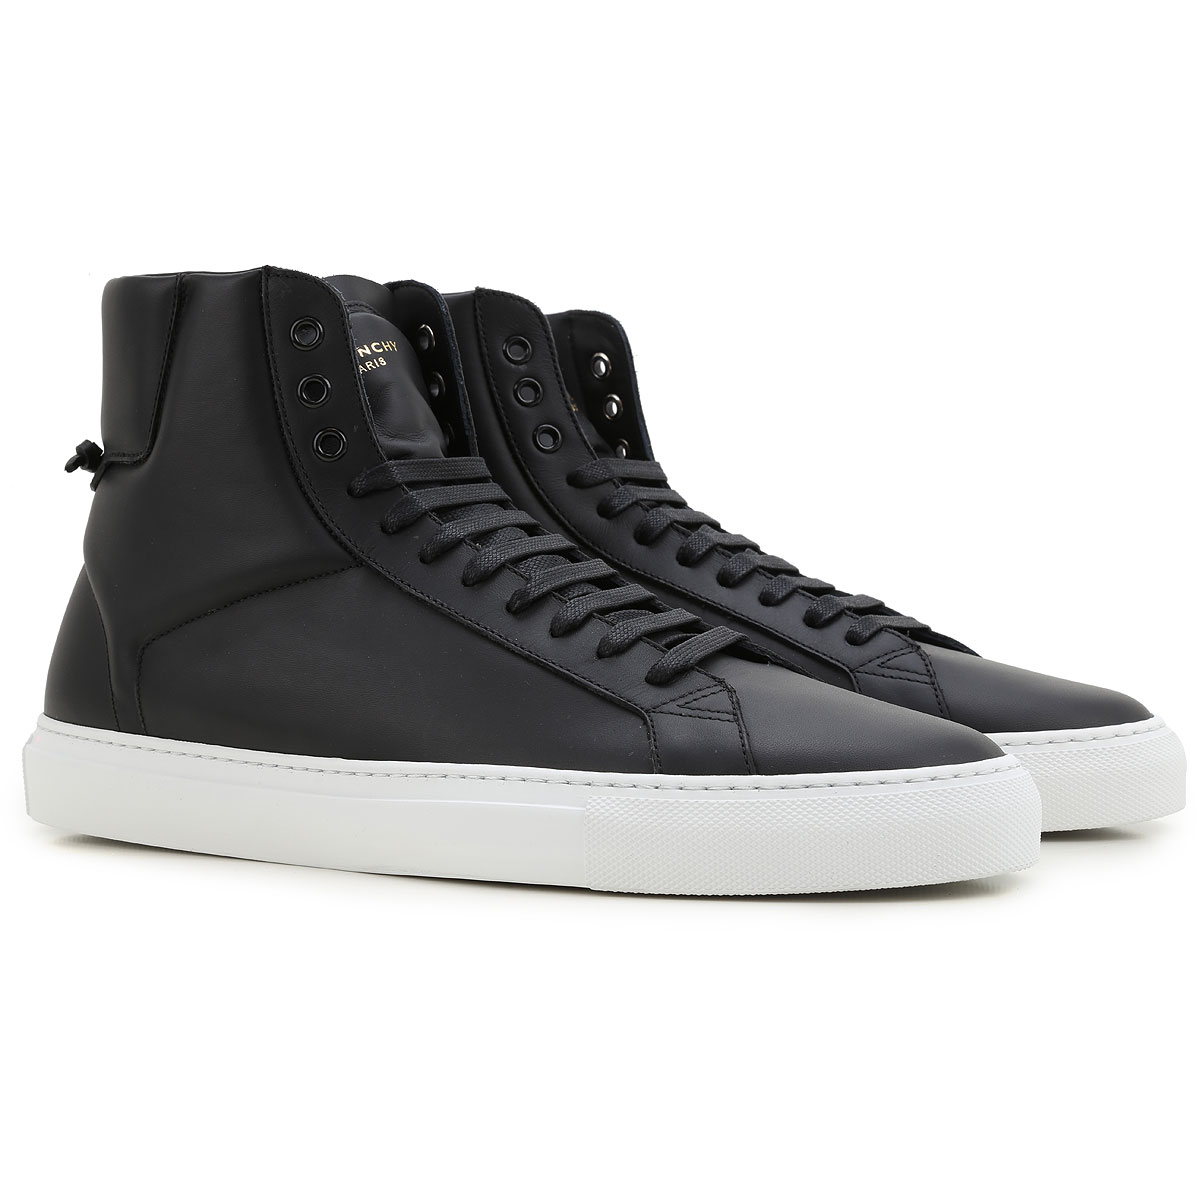 Mens Shoes Givenchy, Style code: bm08220876-001-